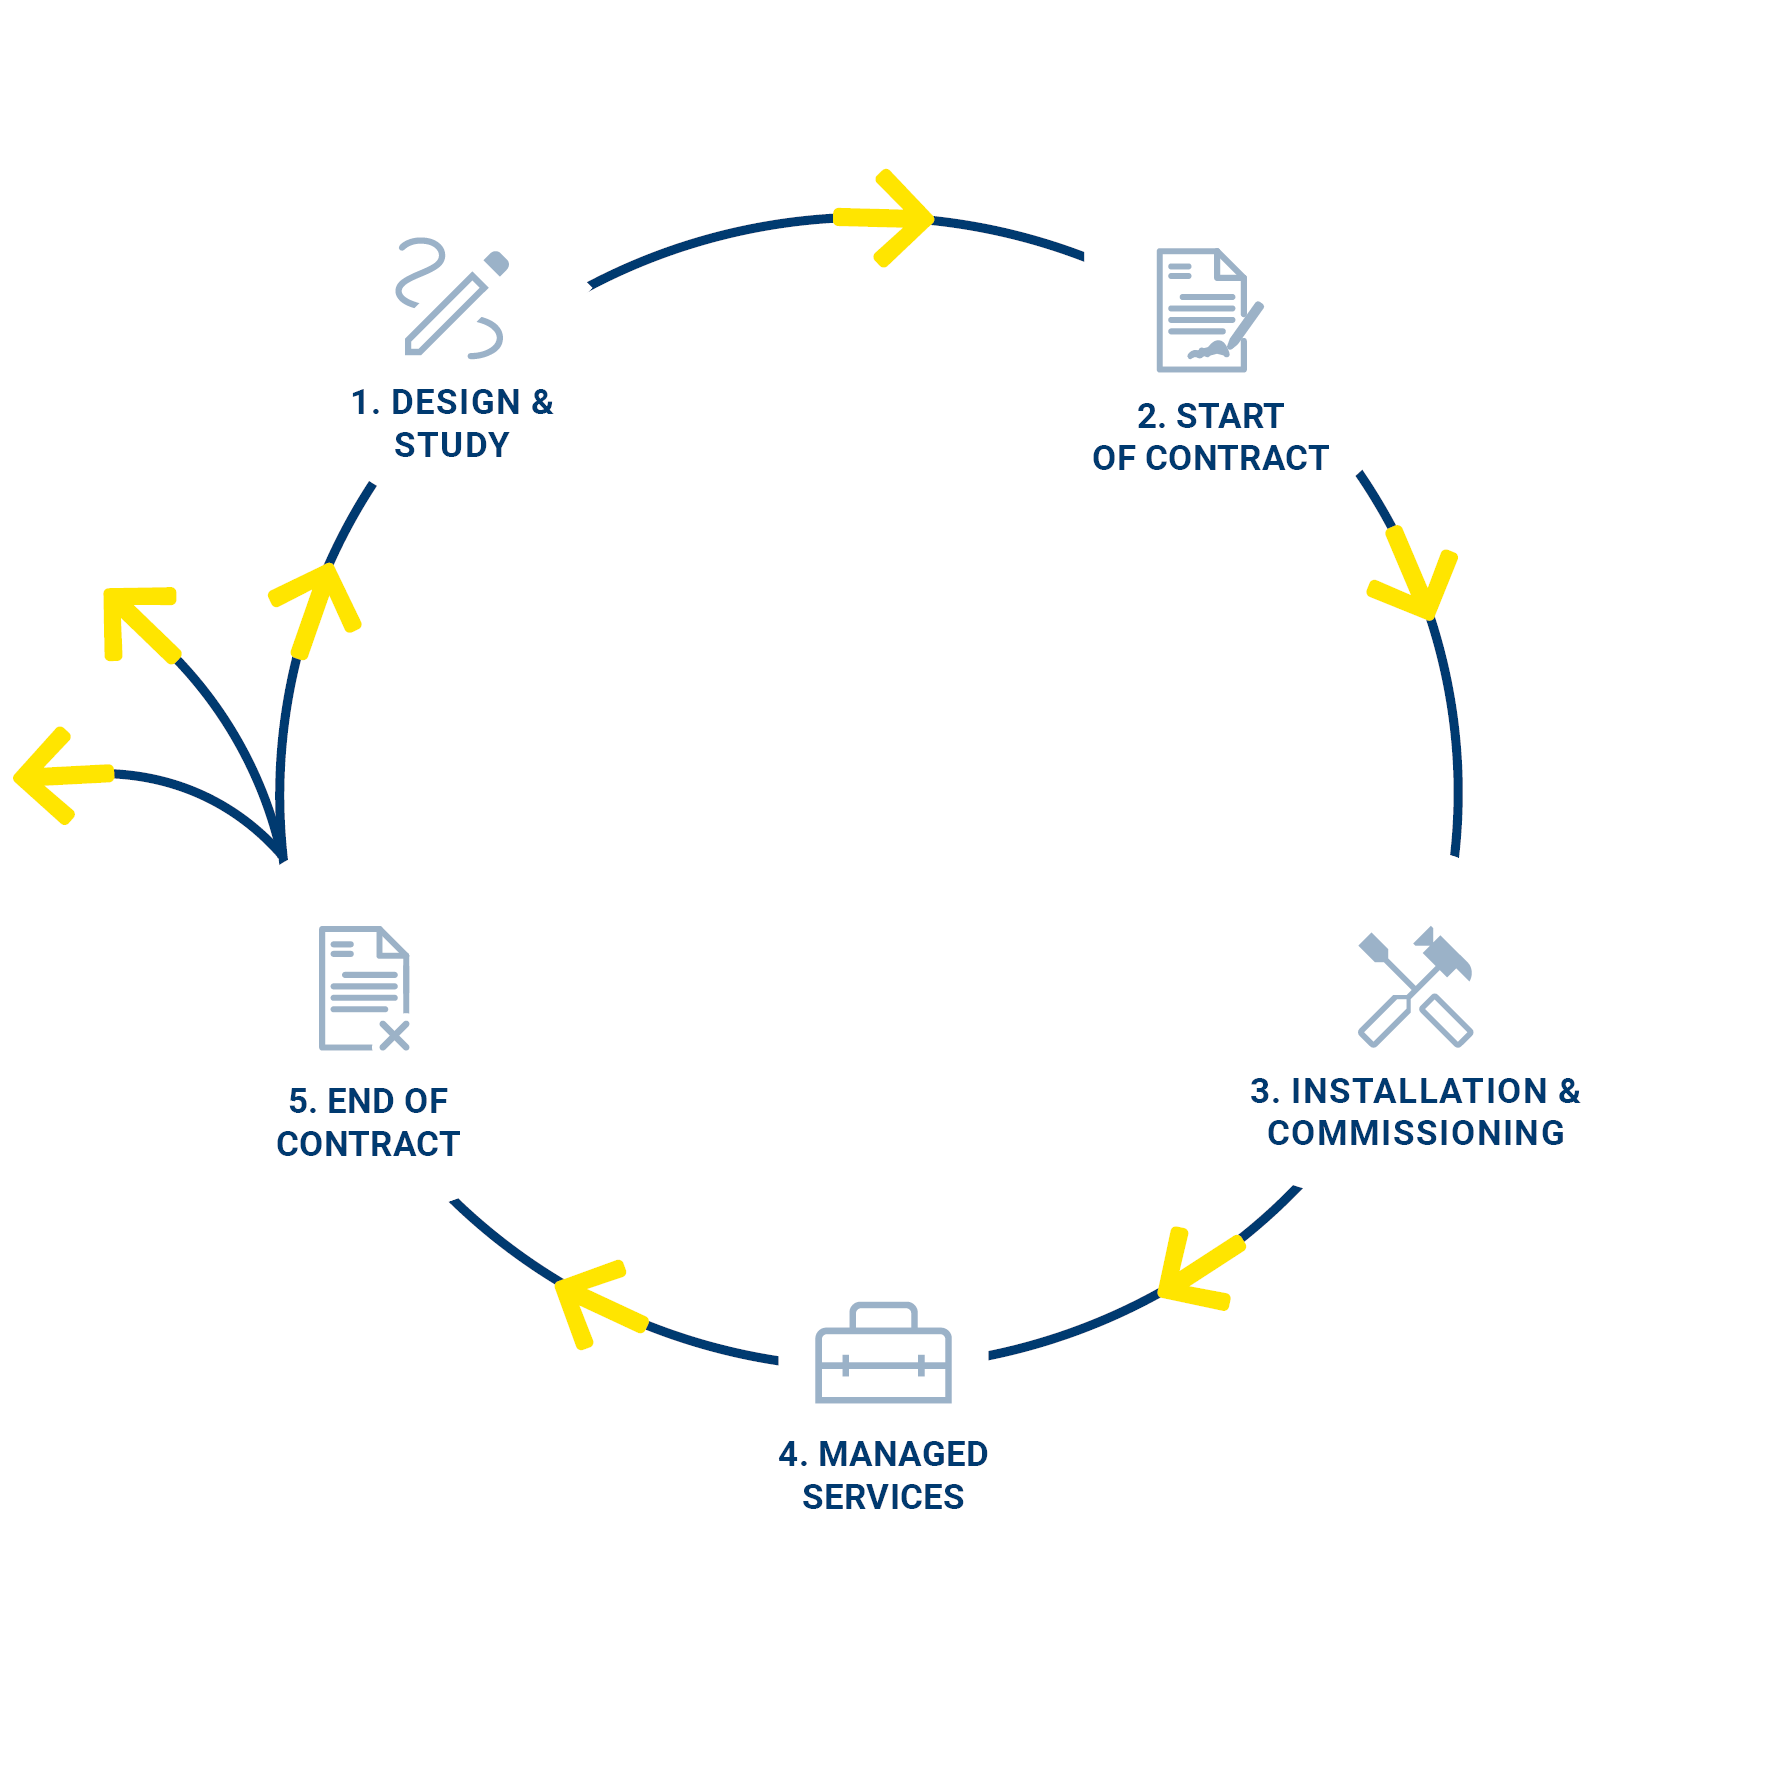 The C-LaaS Lifecycle by ETAP